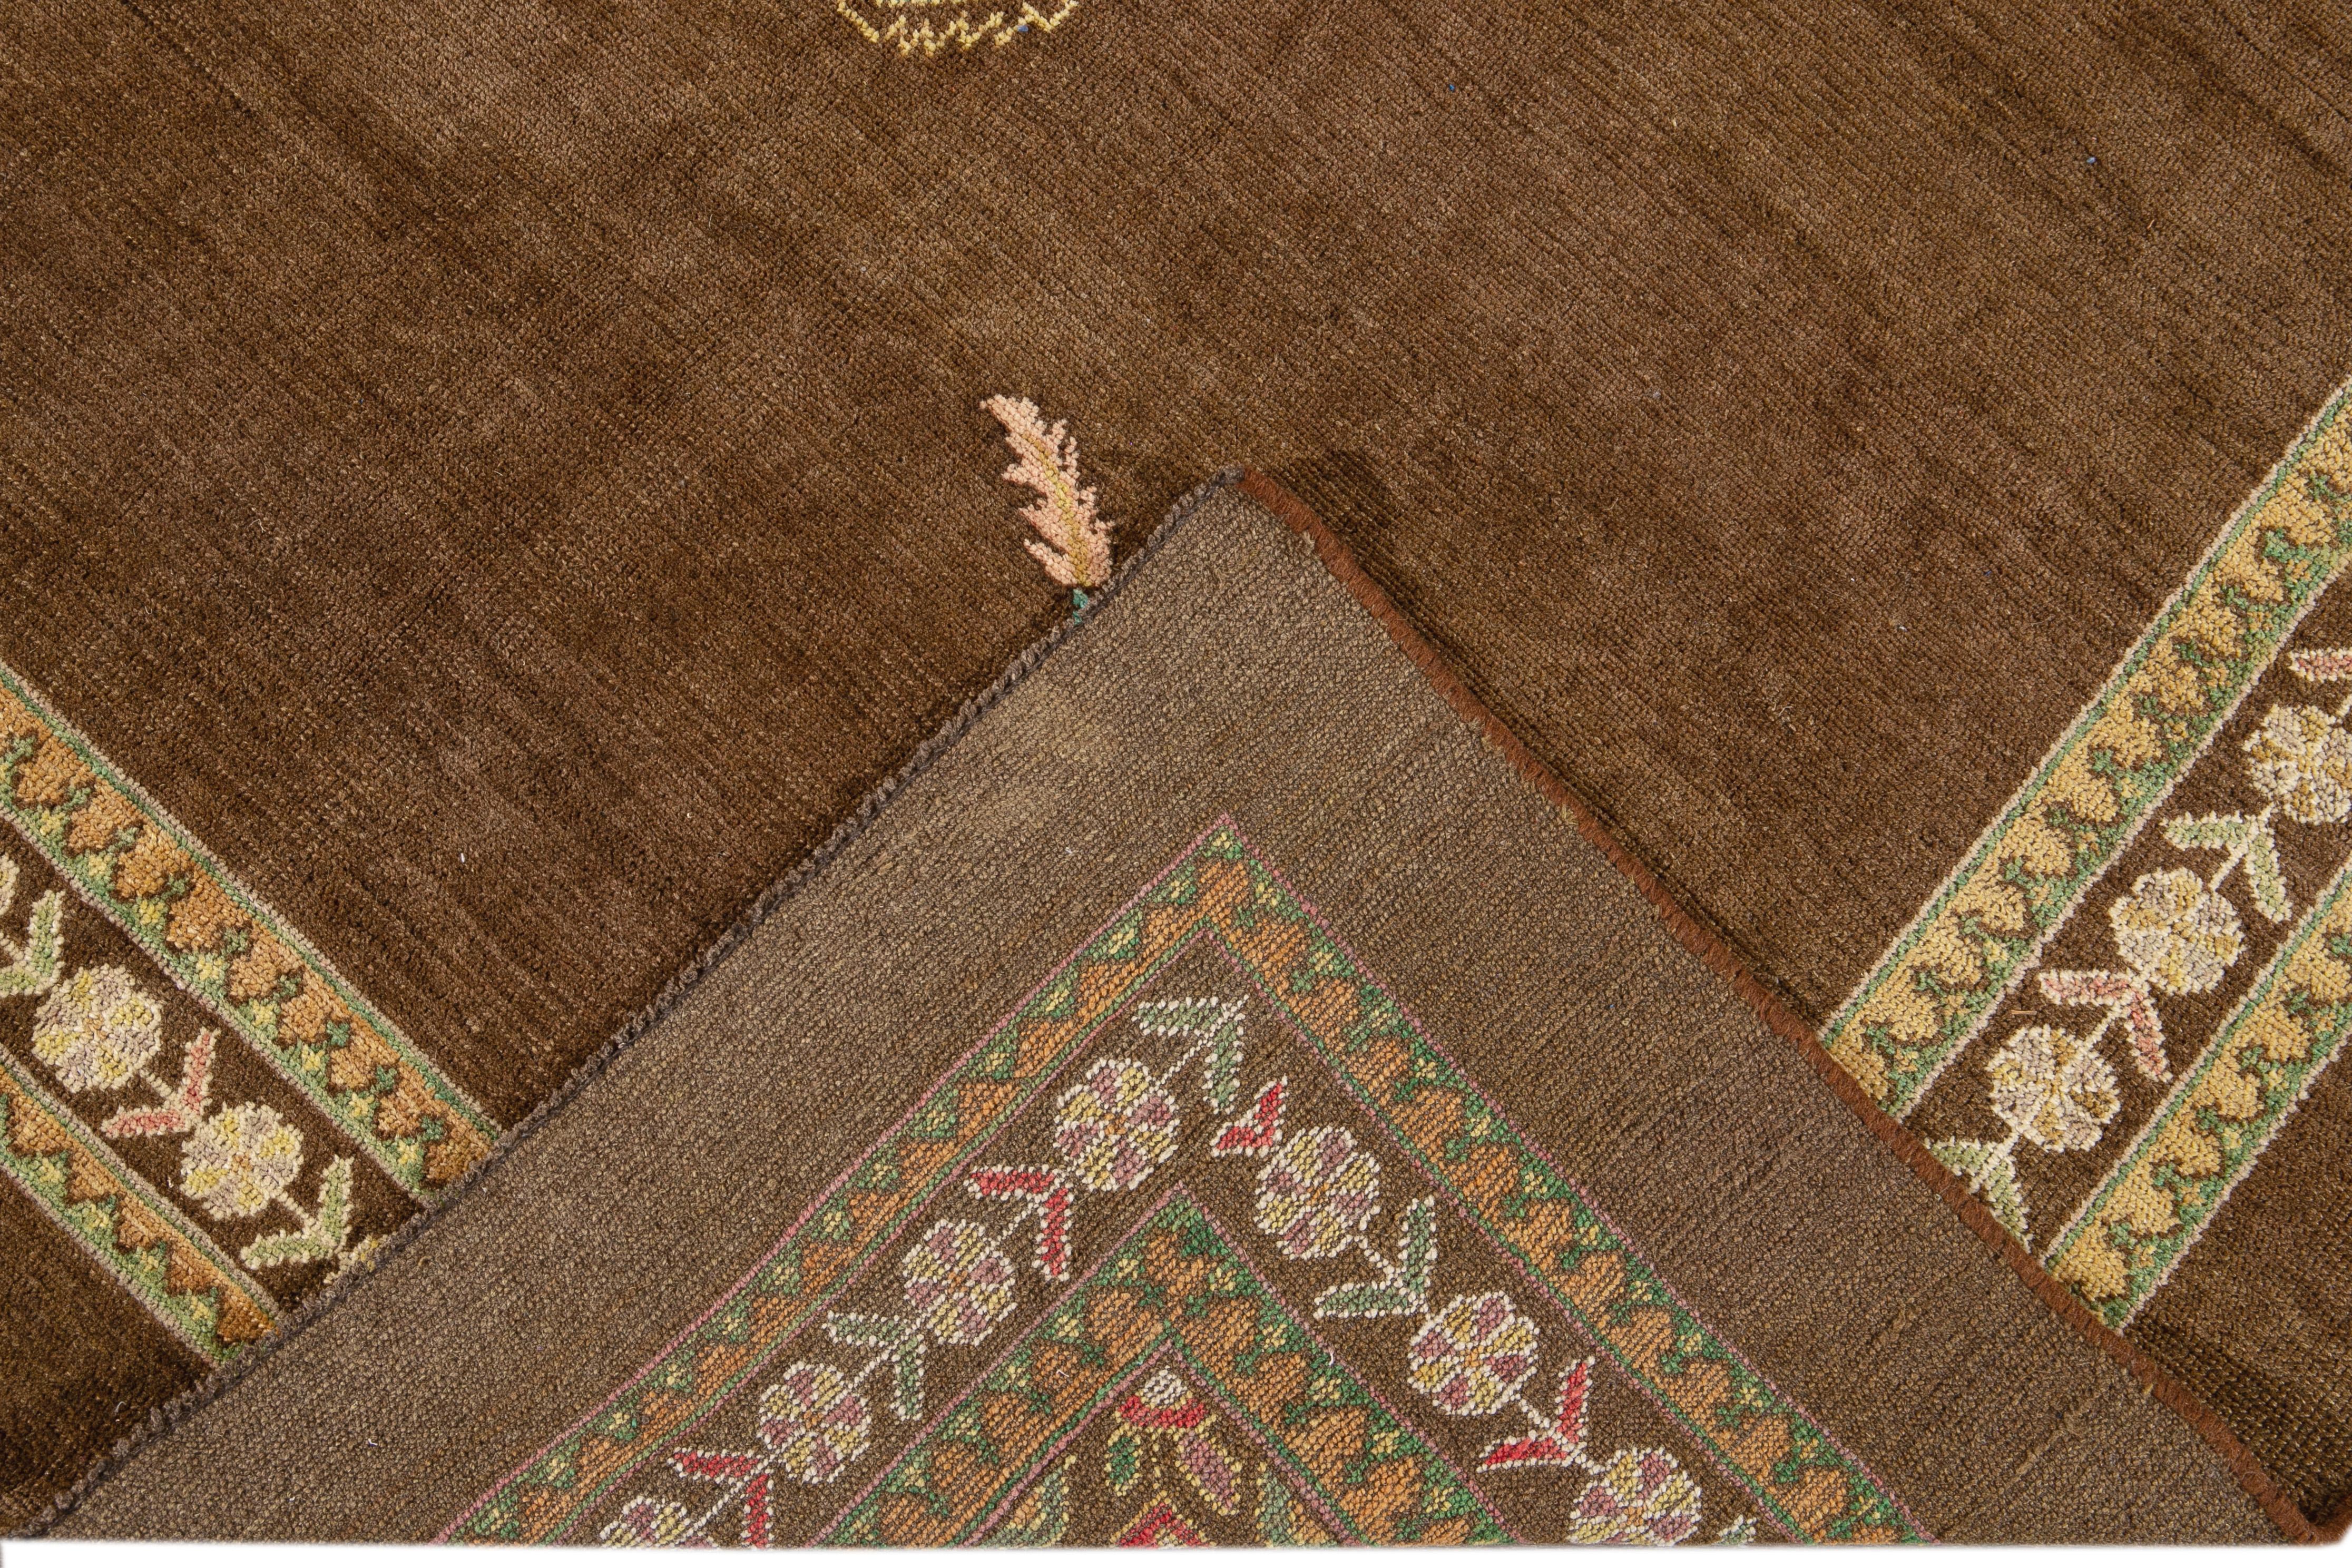 Beautiful Modern hand-knotted wool rug with a brown field. This Revival Collection rug has blue, pink, yellow, and green accents all-over a gorgeous geometric medallion Floral design.

This rug measures 6'9